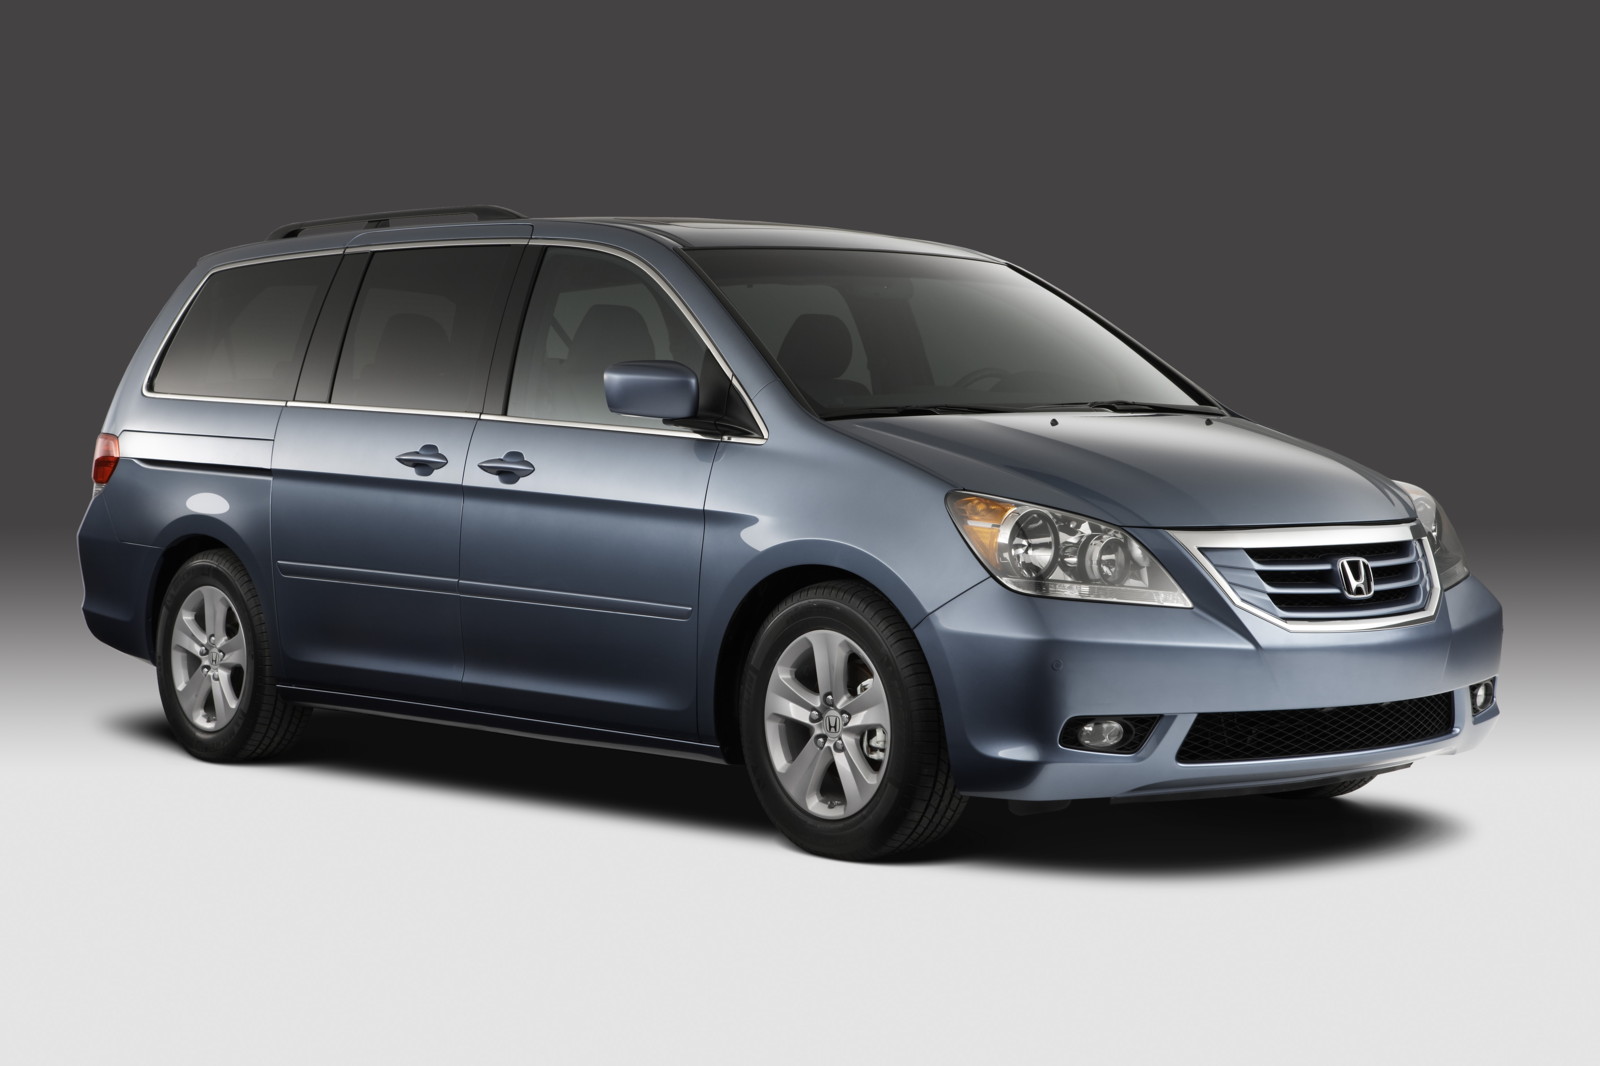 2010 Honda Odyssey Review, Ratings, Specs, Prices, and Photos - The Car